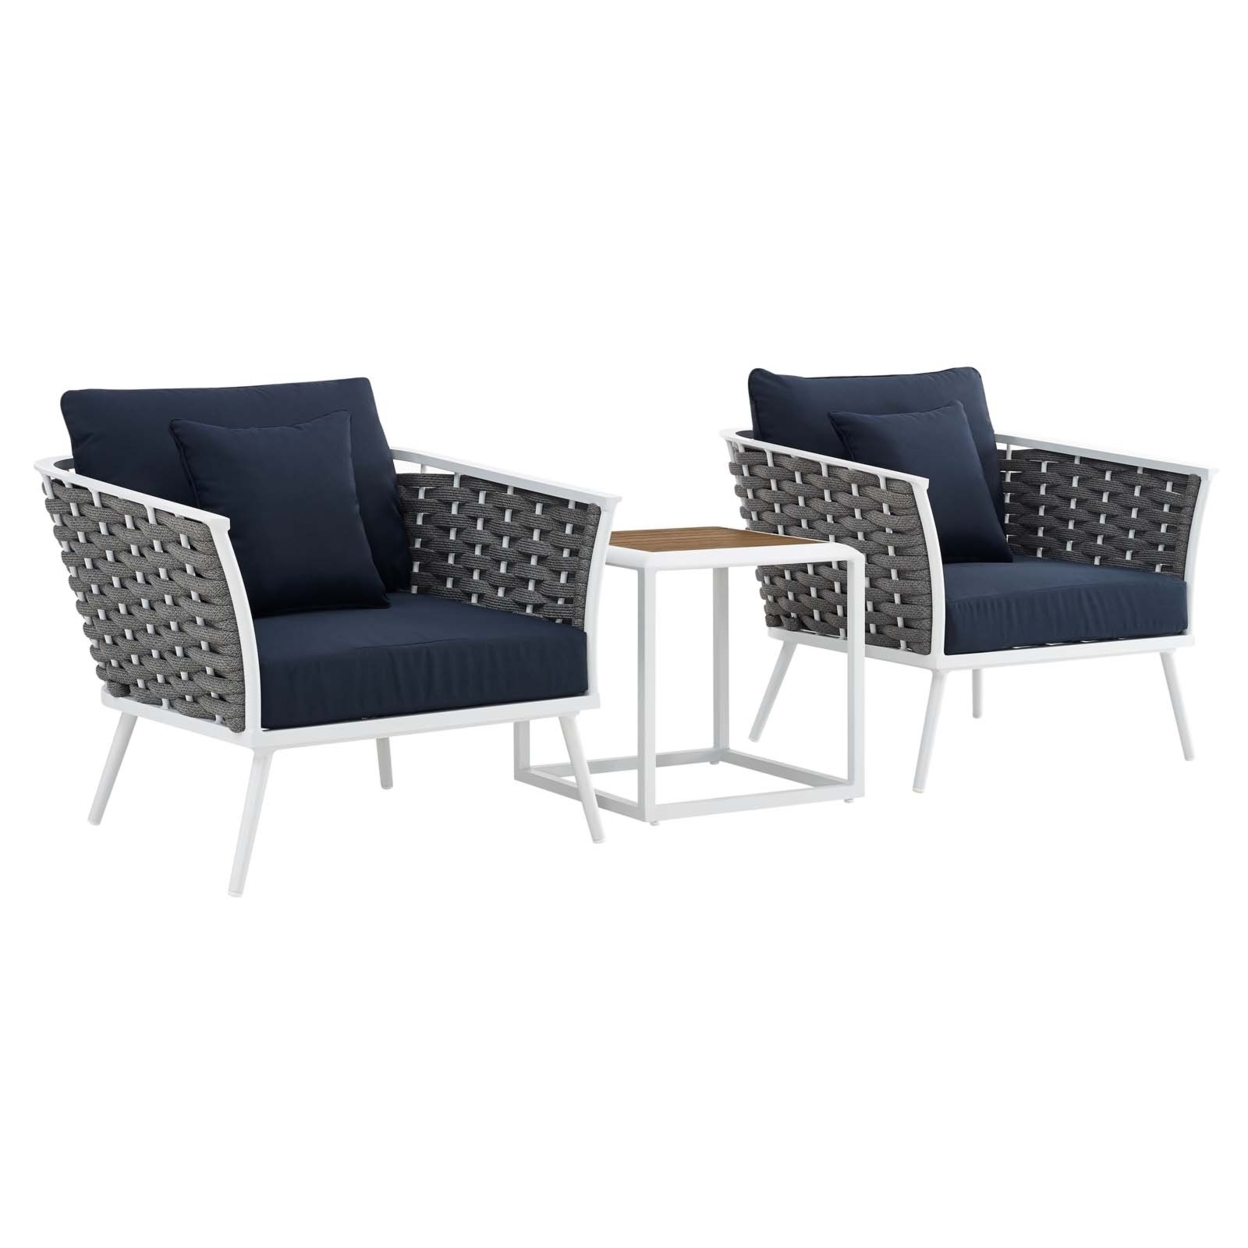 Modway Stance 3-Piece Aluminum & Fabric Patio Set in White and Navy - image 1 of 10